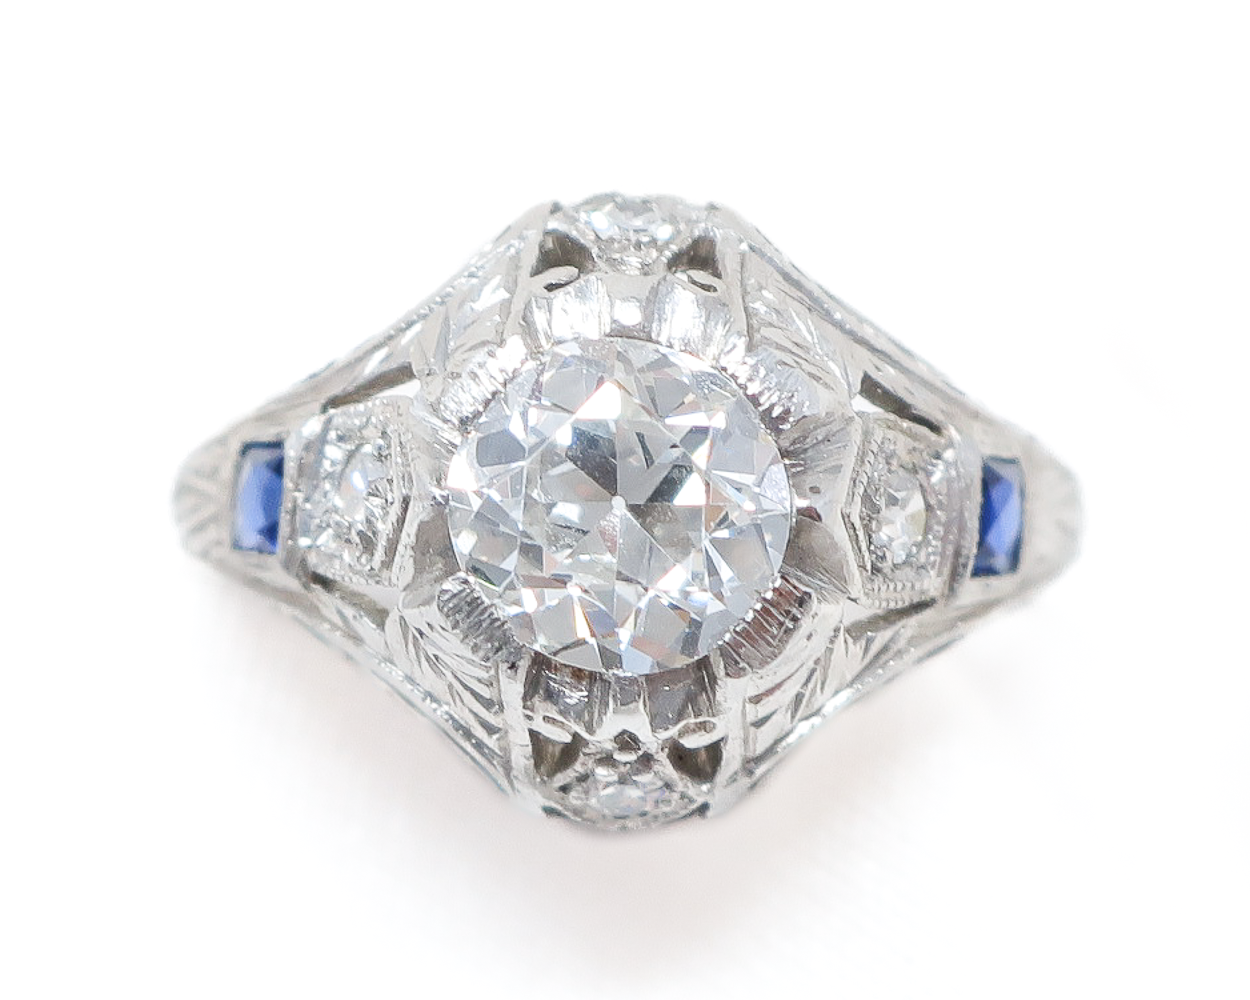 Art Deco Diamond Ring with Sapphire Accents